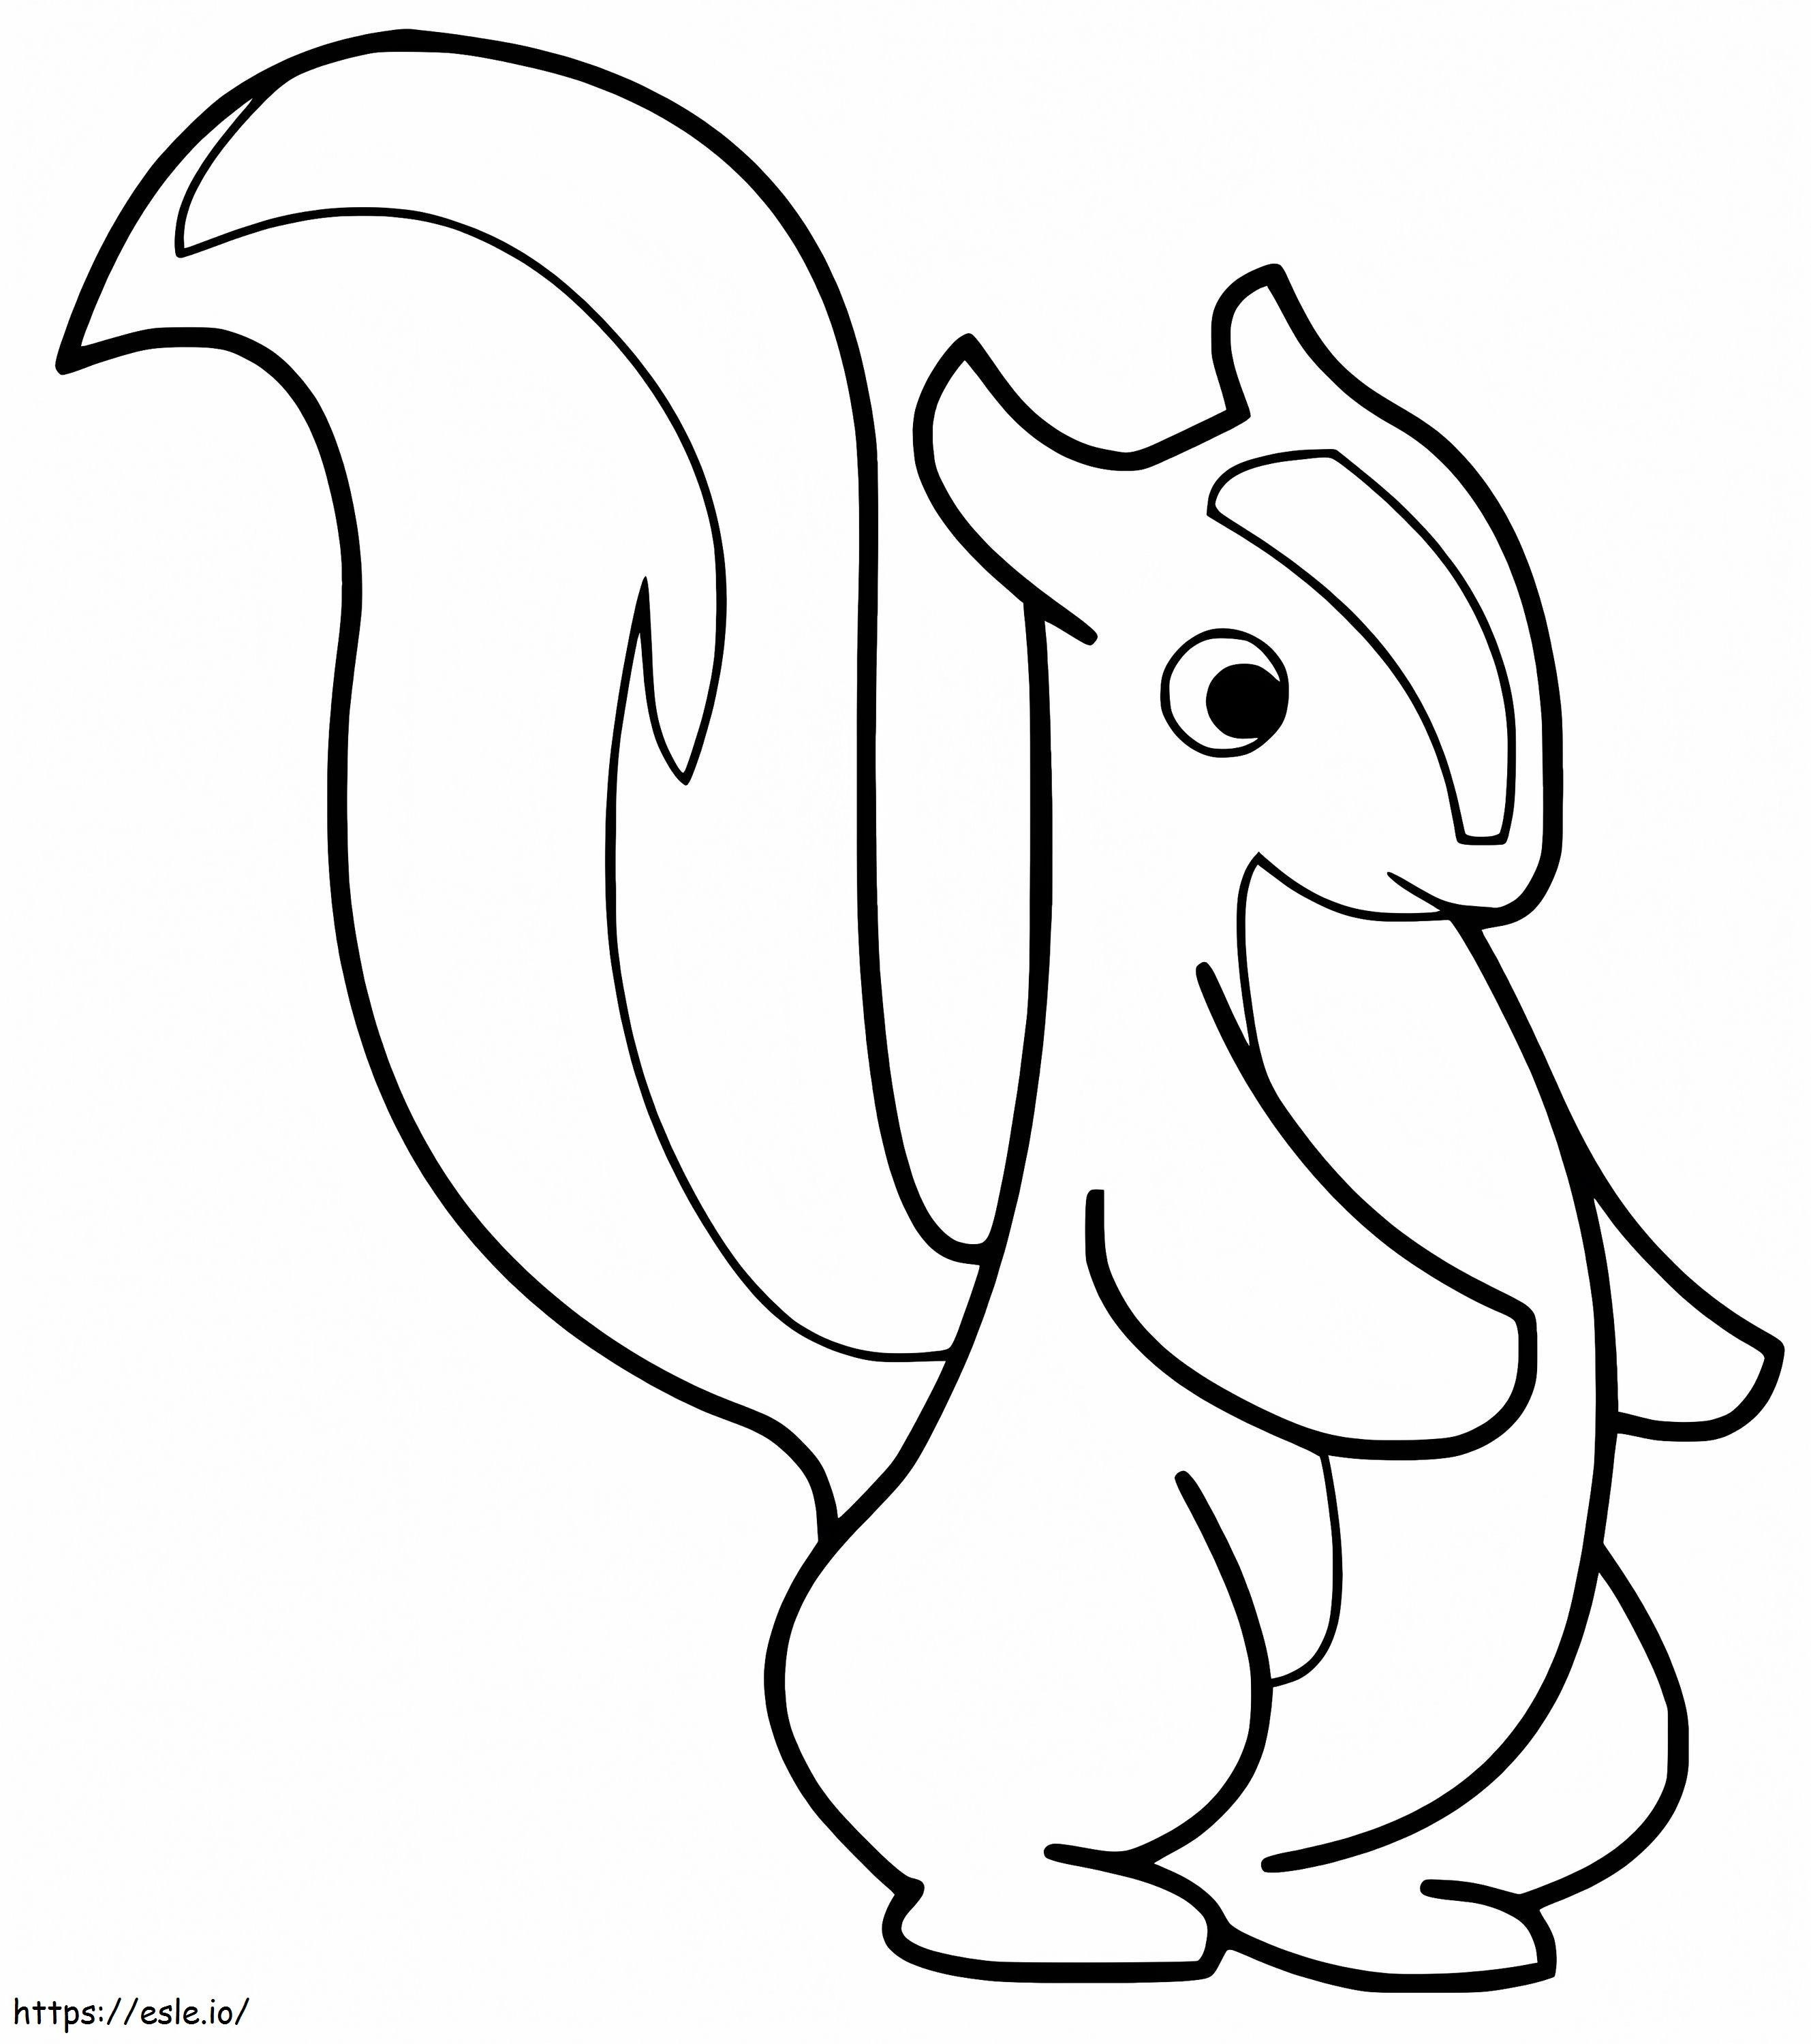 Lovely Skunk coloring page